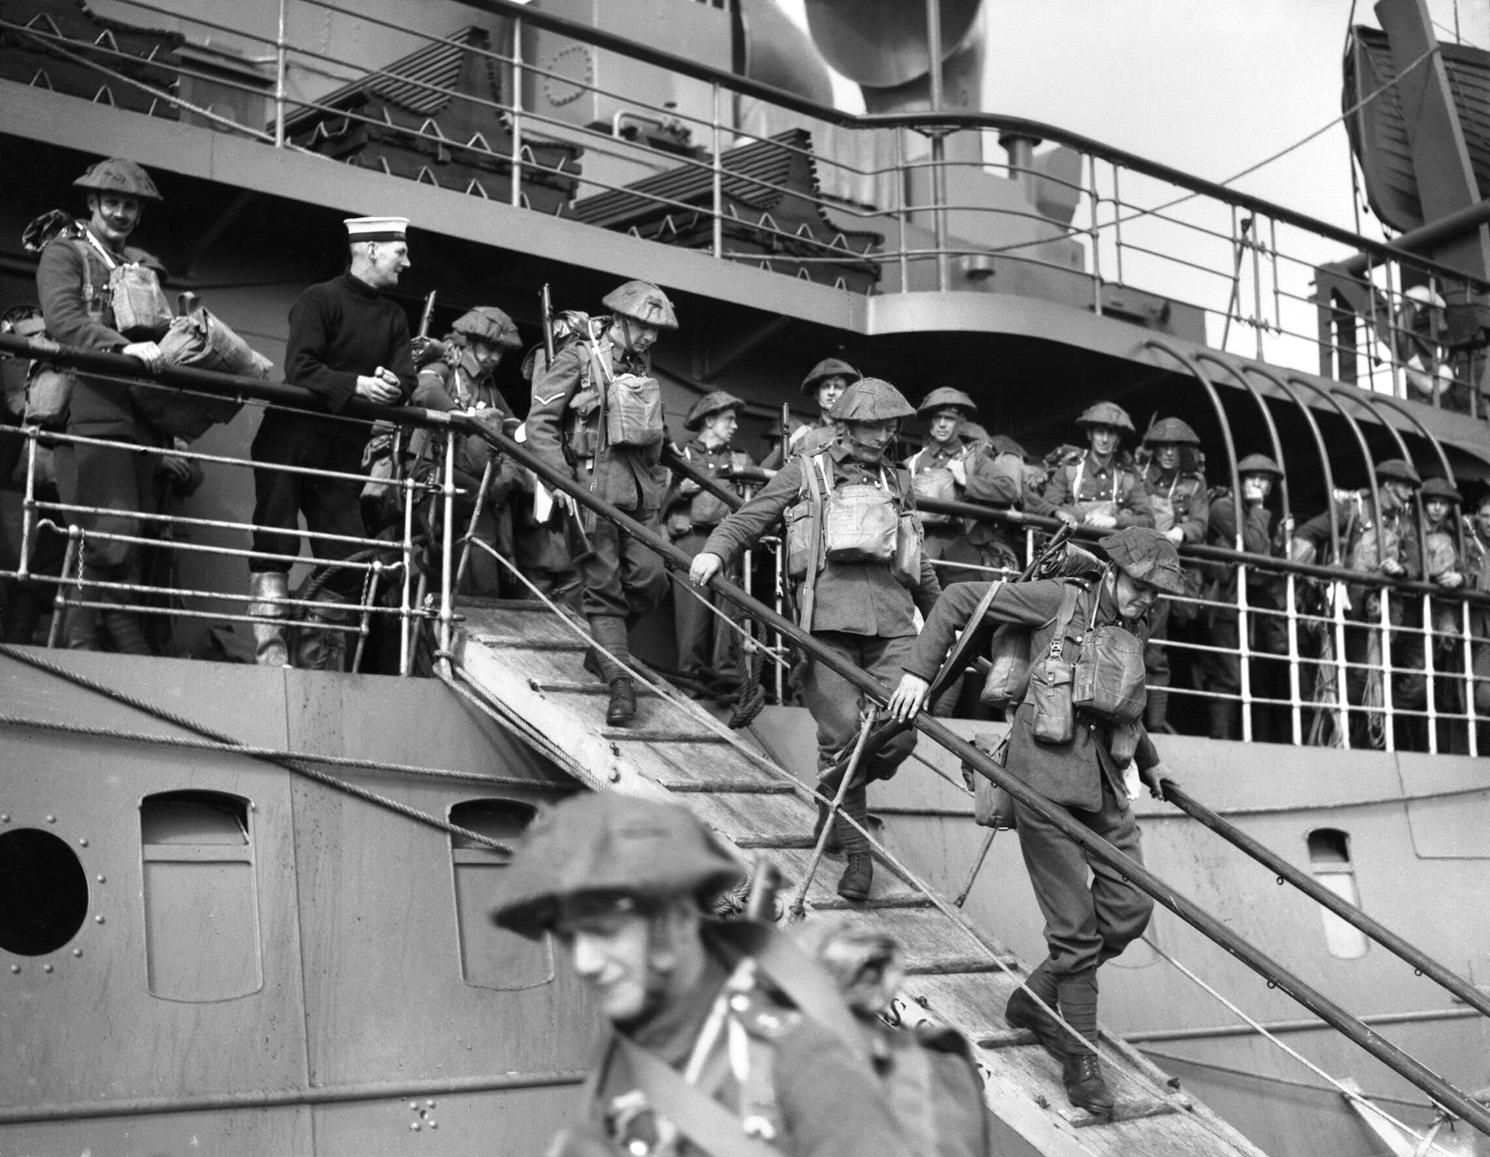 On September 16, 1939, British soldiers of the 2nd Royal Inniskilling Fusiliers disembark from the steamer Royal Sovereign at the French port of Cherbourg. 